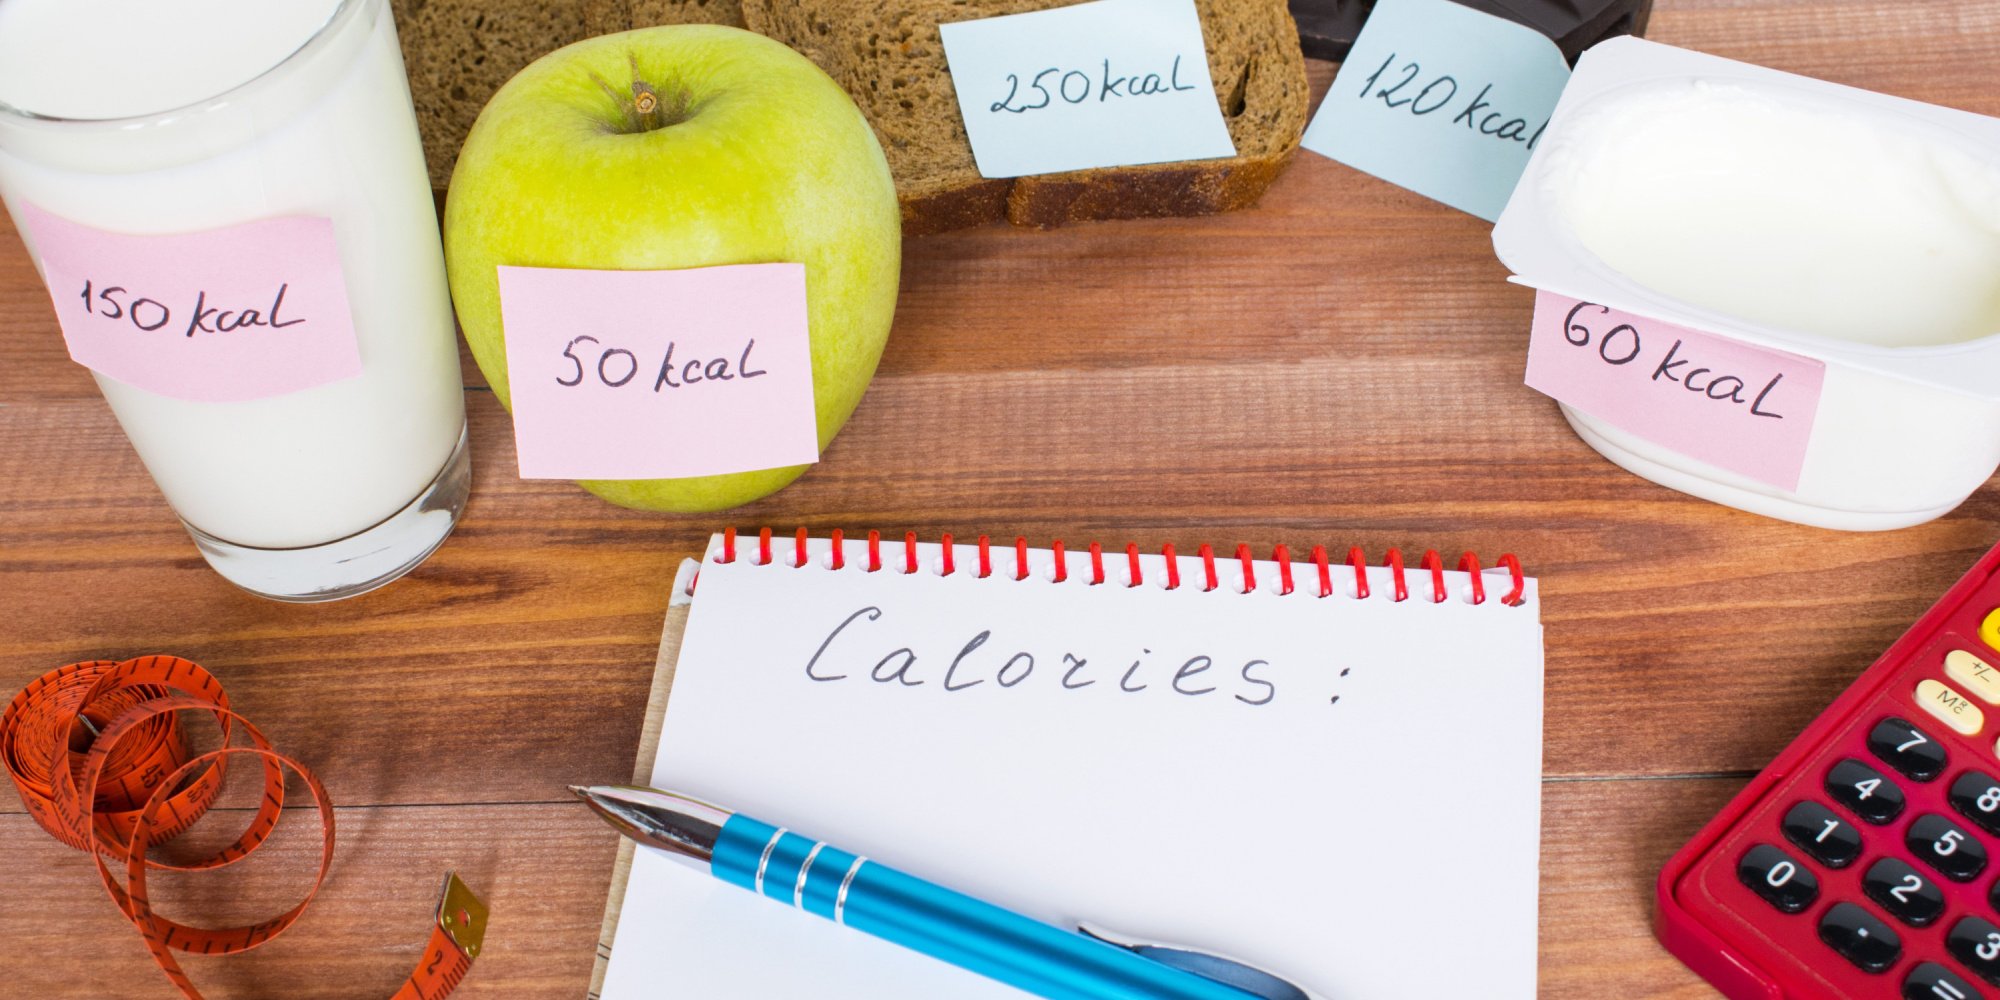 Do I Need To Track My Calories and Macros If I Want To Lose Weight?